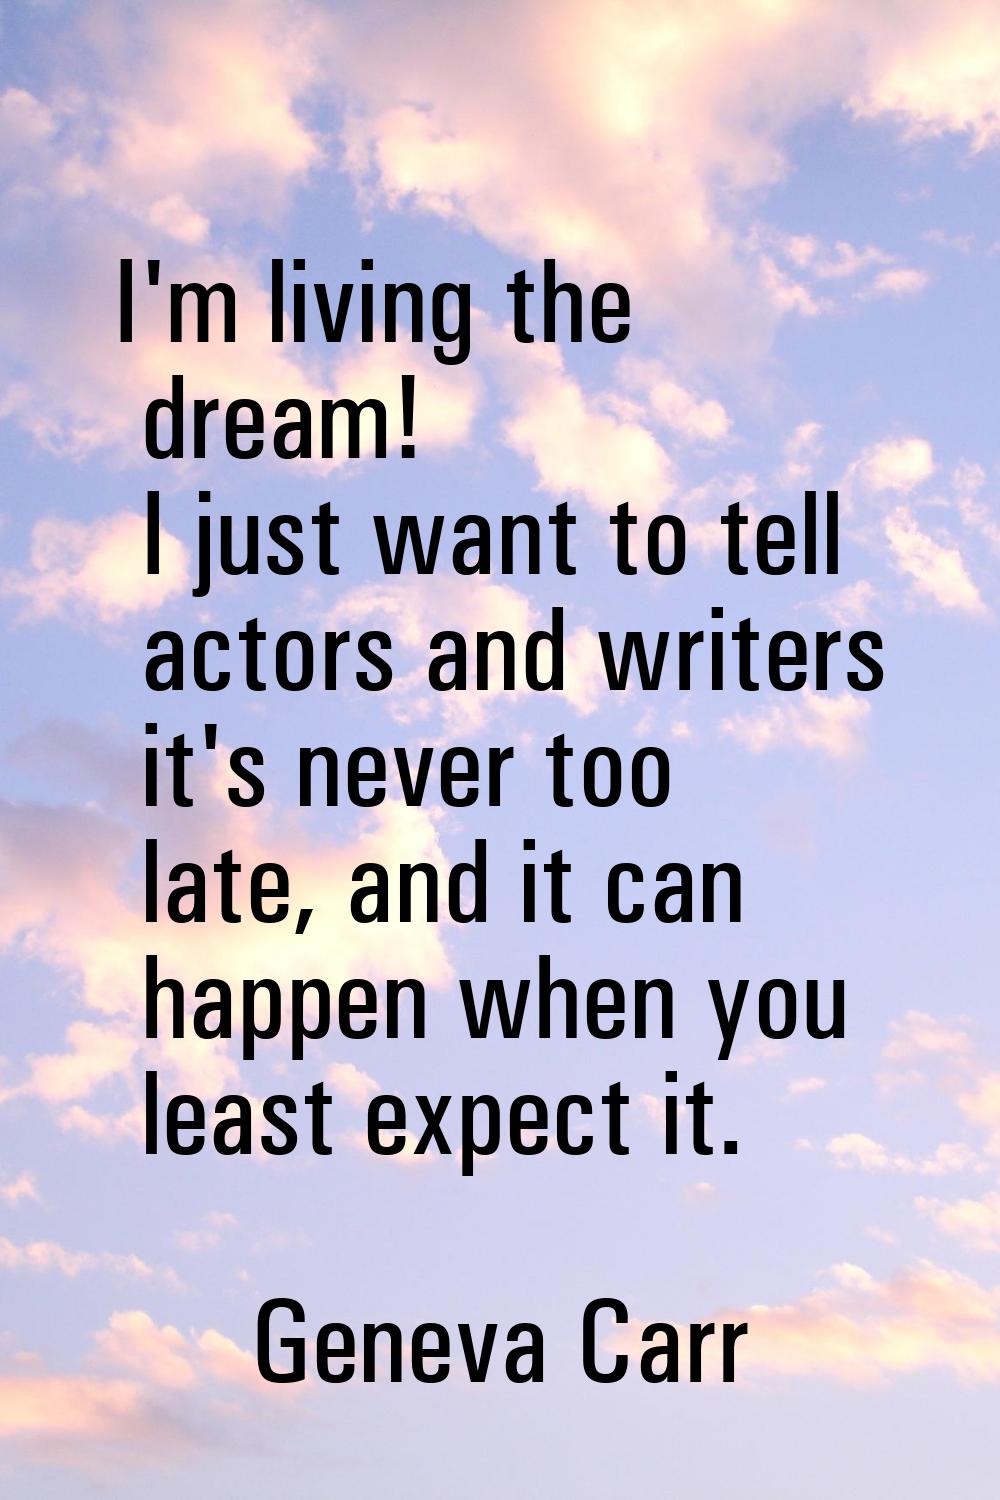 I'm living the dream! I just want to tell actors and writers it's never too late, and it can happen